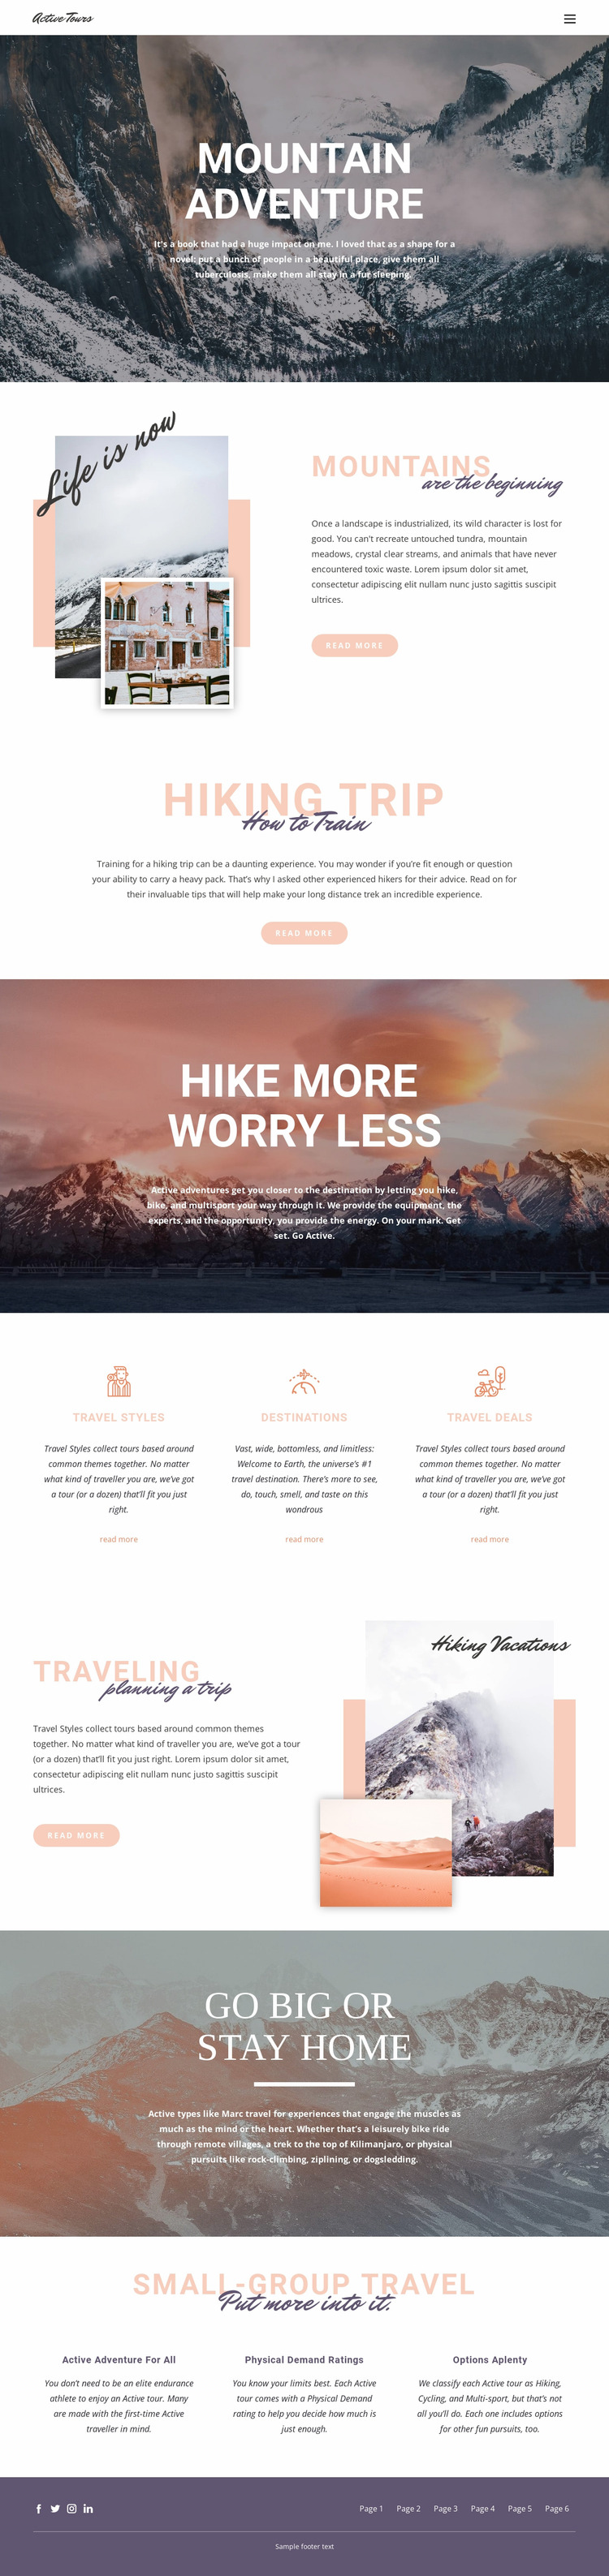 Guided backpacking trips Html Website Builder